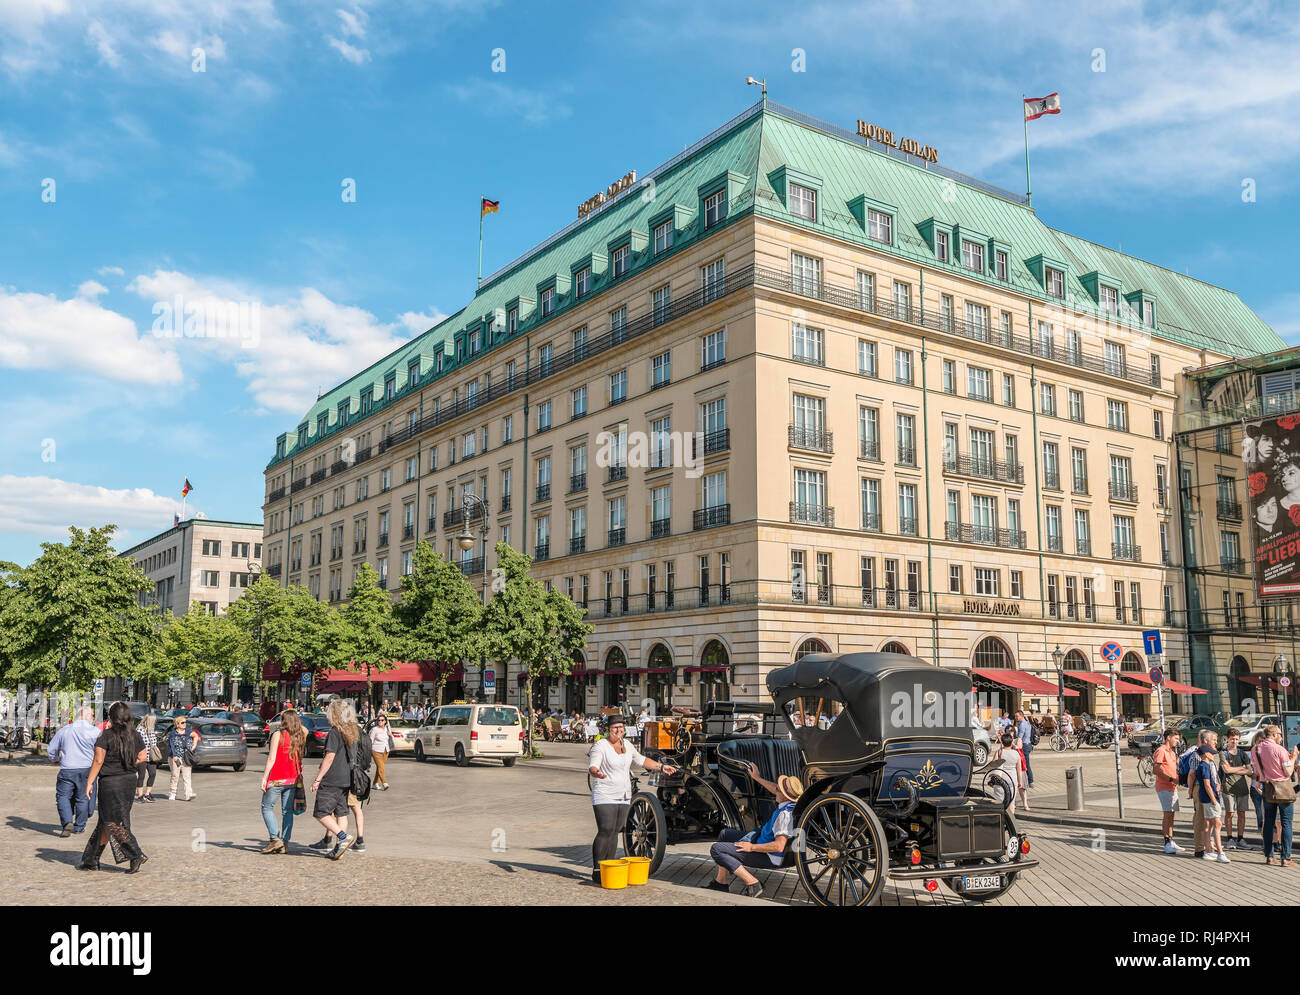 Berlin Cityscape in front of the Adlon Hotel, Germany Stock Photo